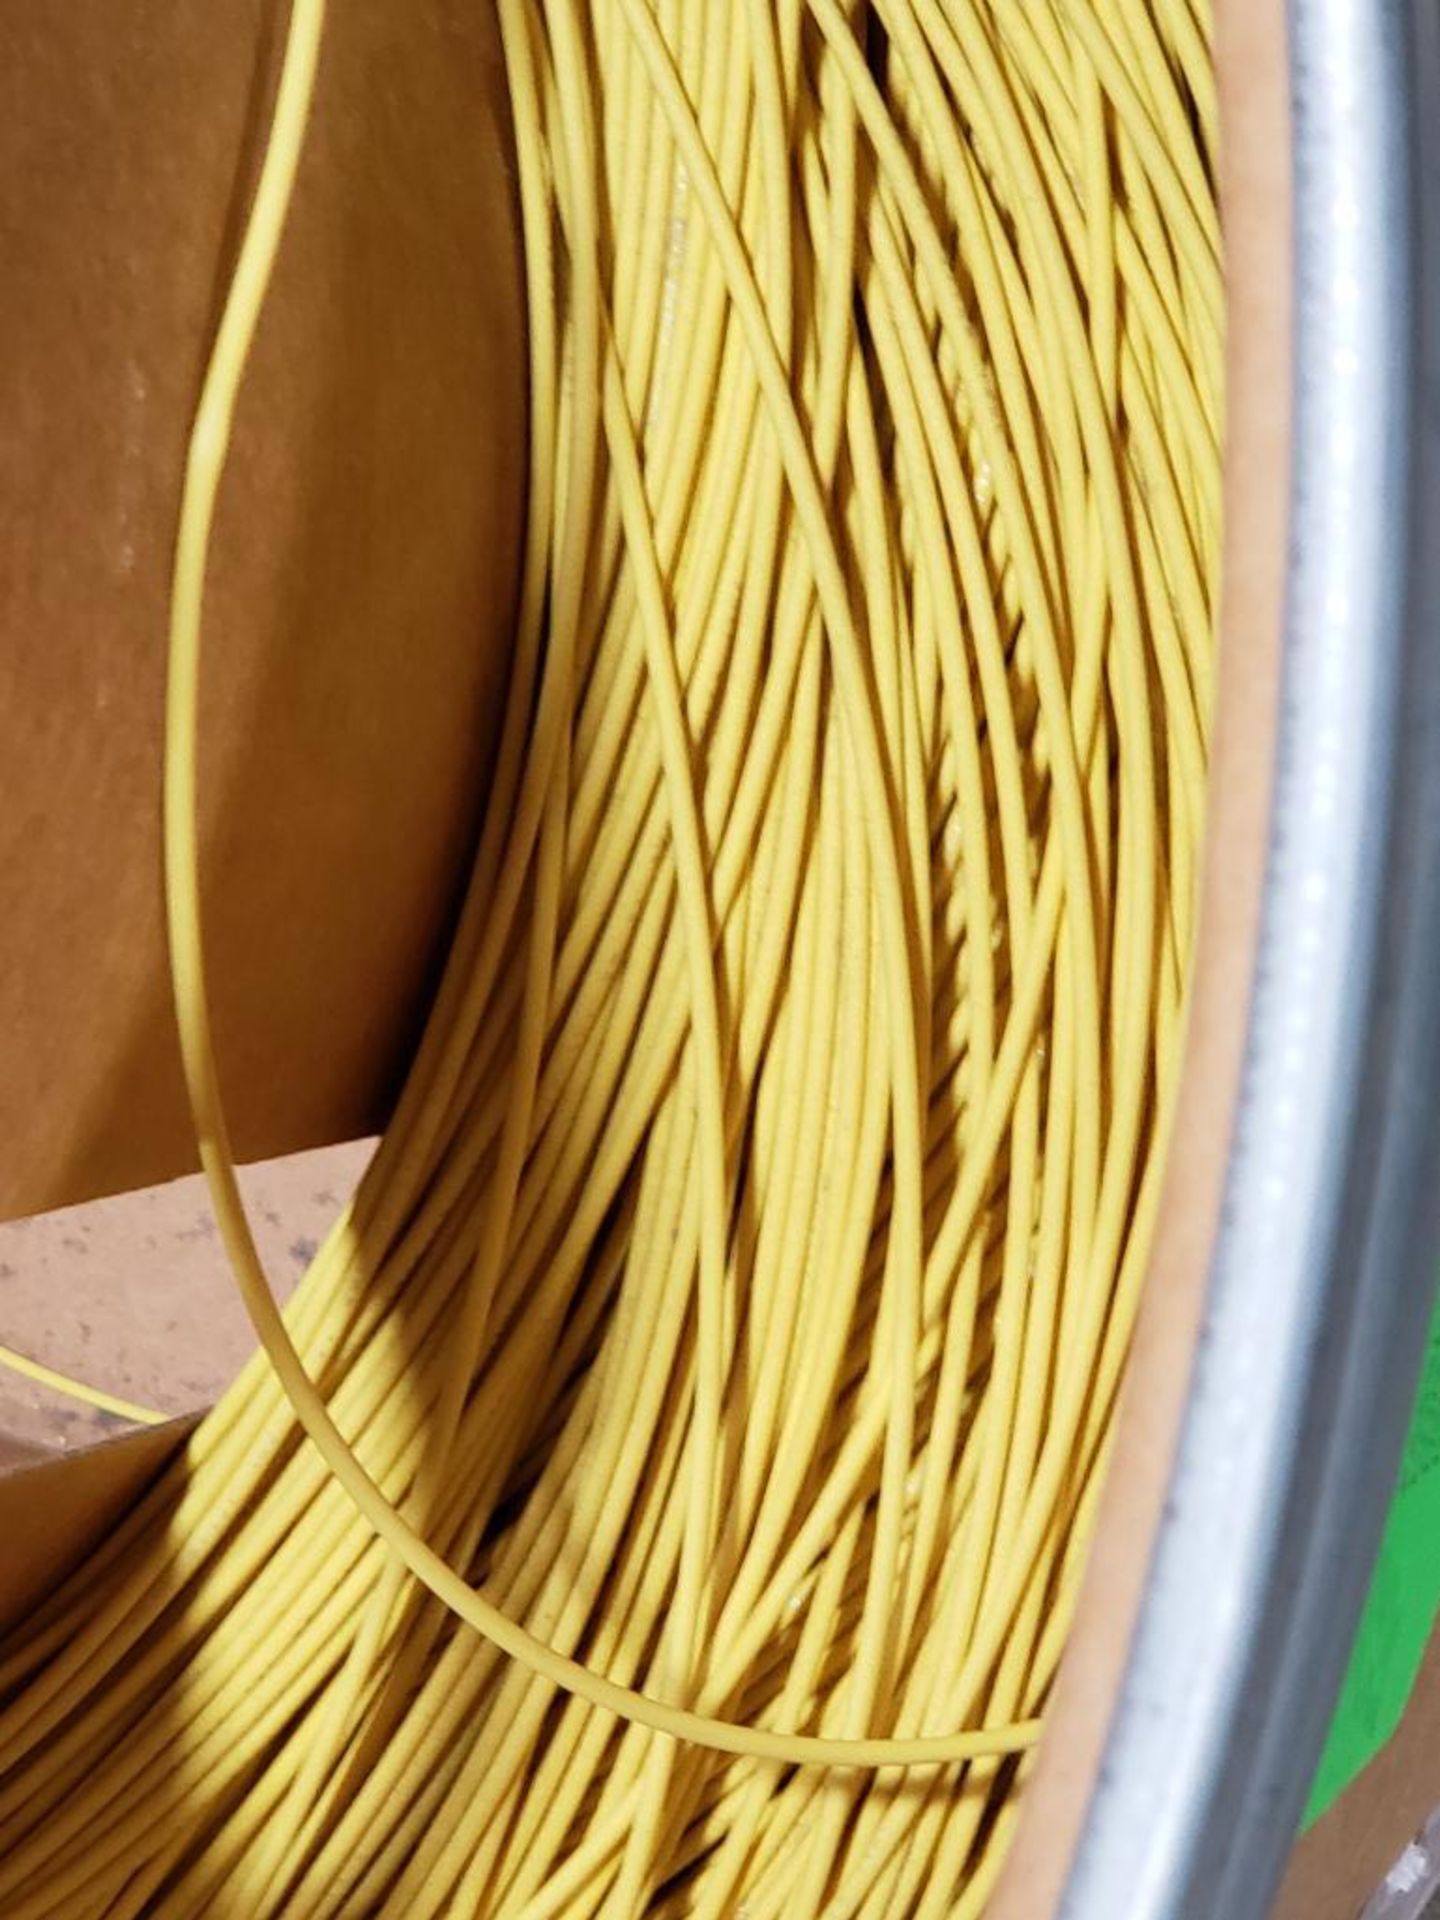 14 awg yellow print copper wire. Gross barrel weight, 226lbs. Partial barrel. - Image 2 of 5